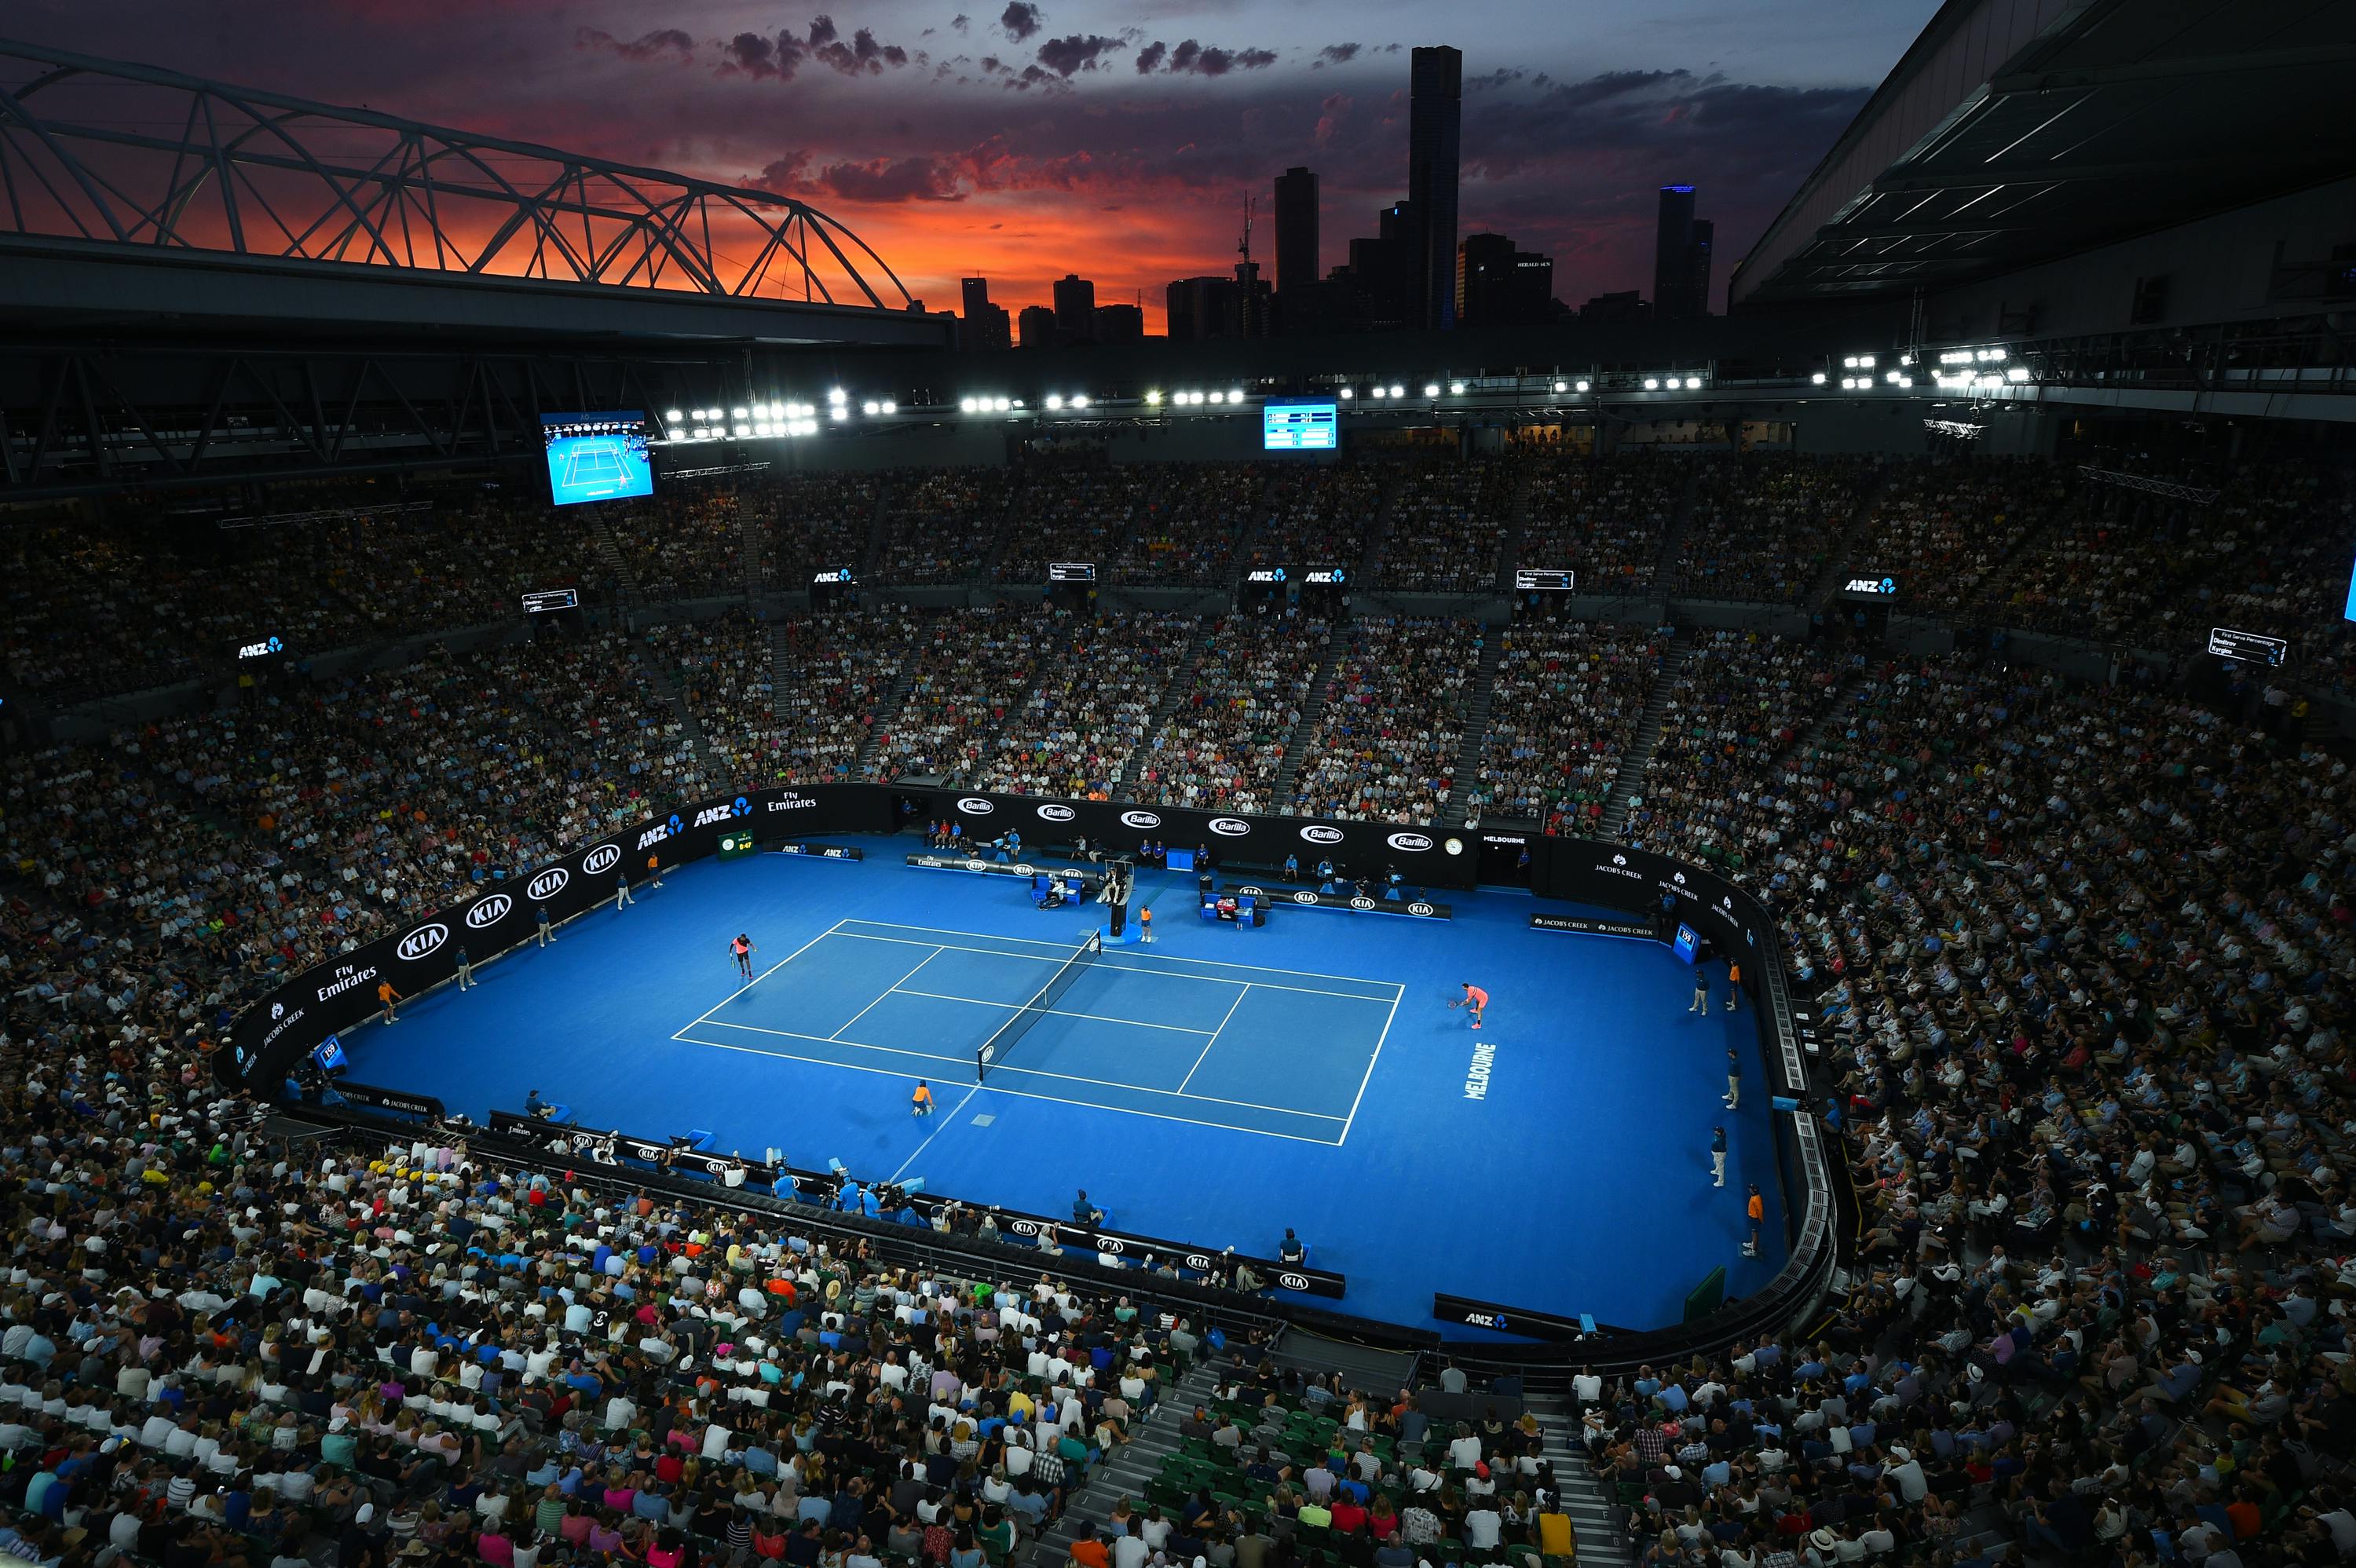 Beautiful skyline at dawn on the Rod Laver Arena during the 2018 Australian Open